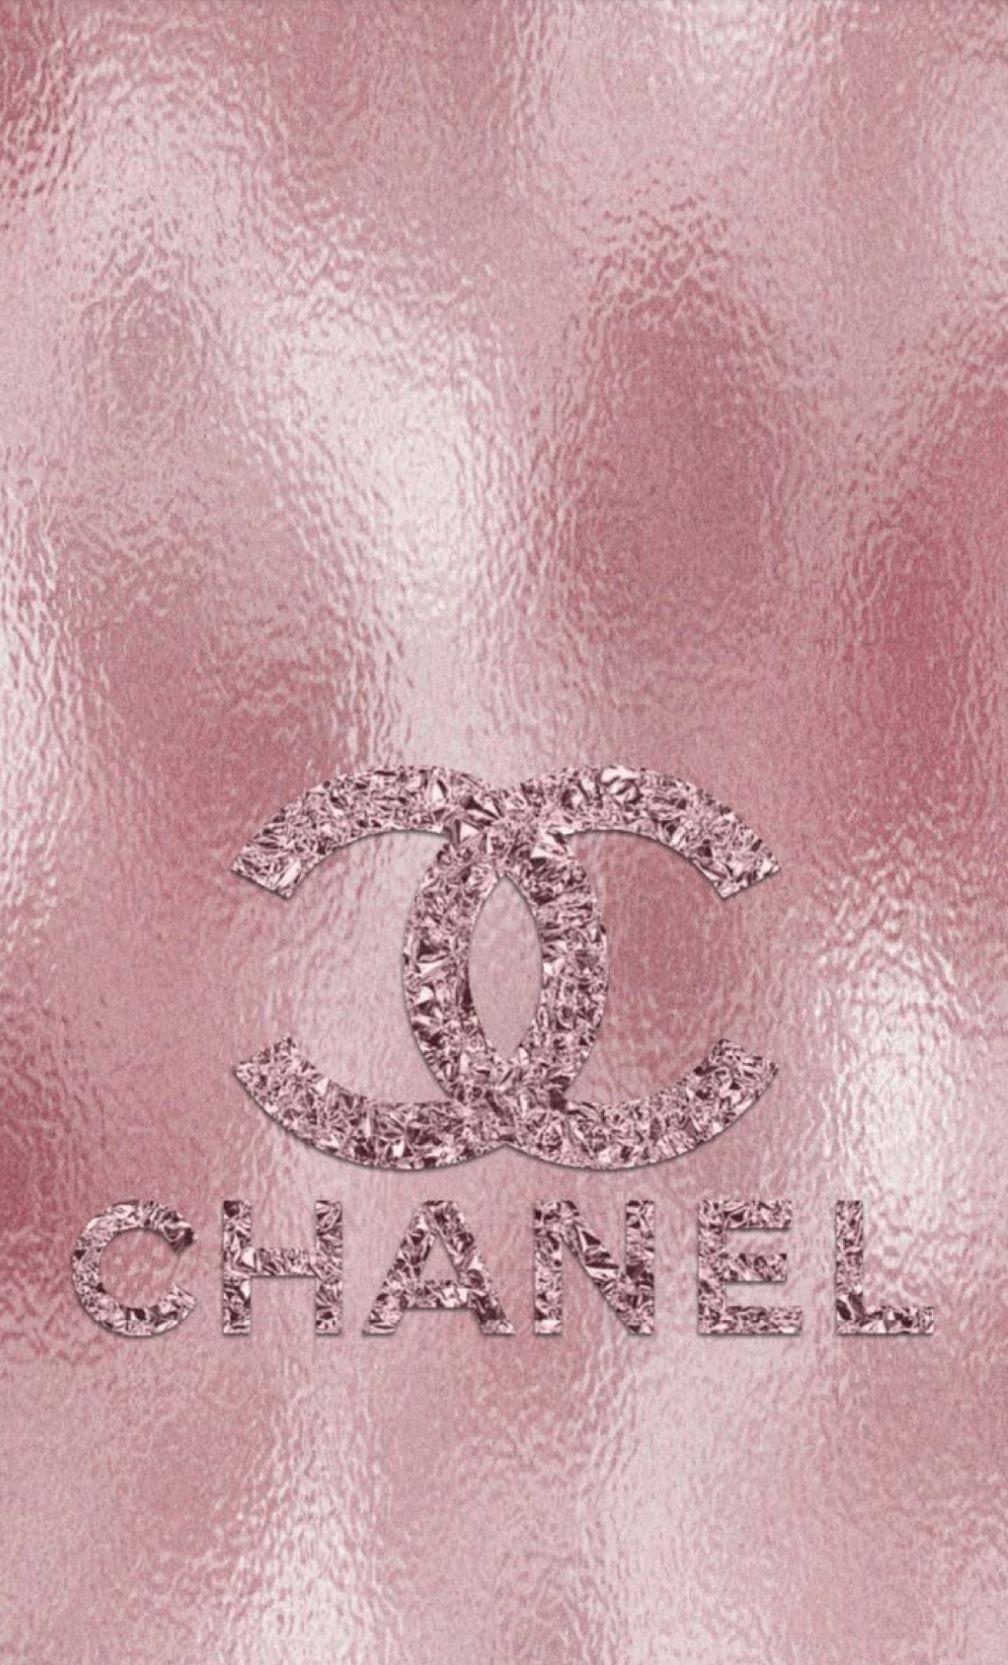 HD wallpaper Coco Chanel HD Wallpaper Coco Chanel text on black background   Wallpaper Flare